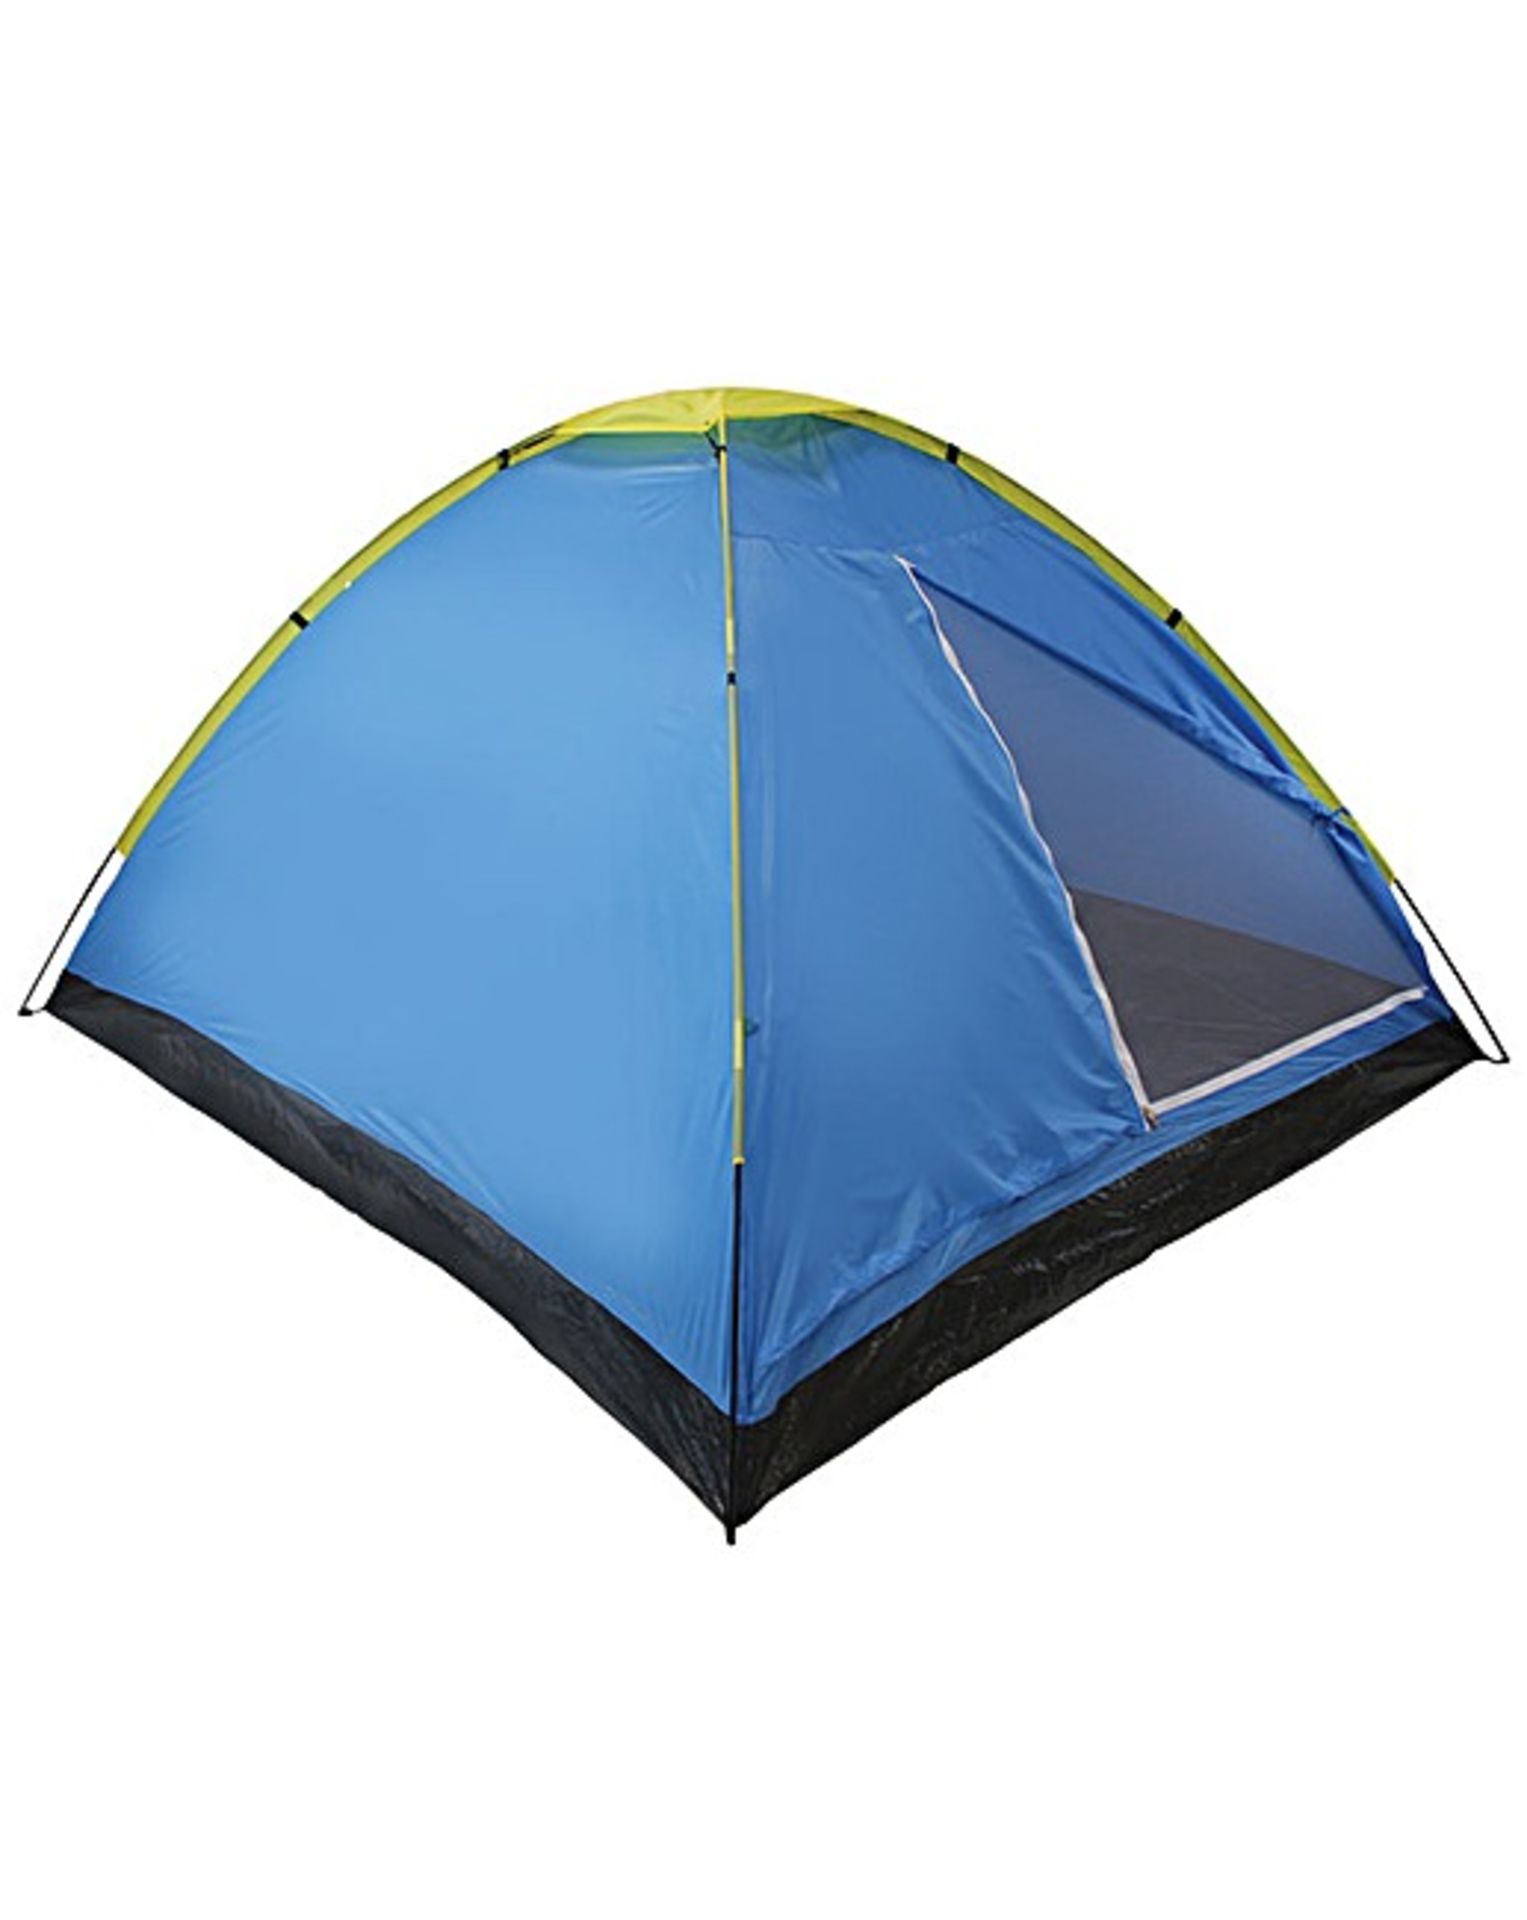 V Brand New Two Person Dome Tent With Fibreglass Poles And Taped Seams RRP21.00 (JD Williams) X 2